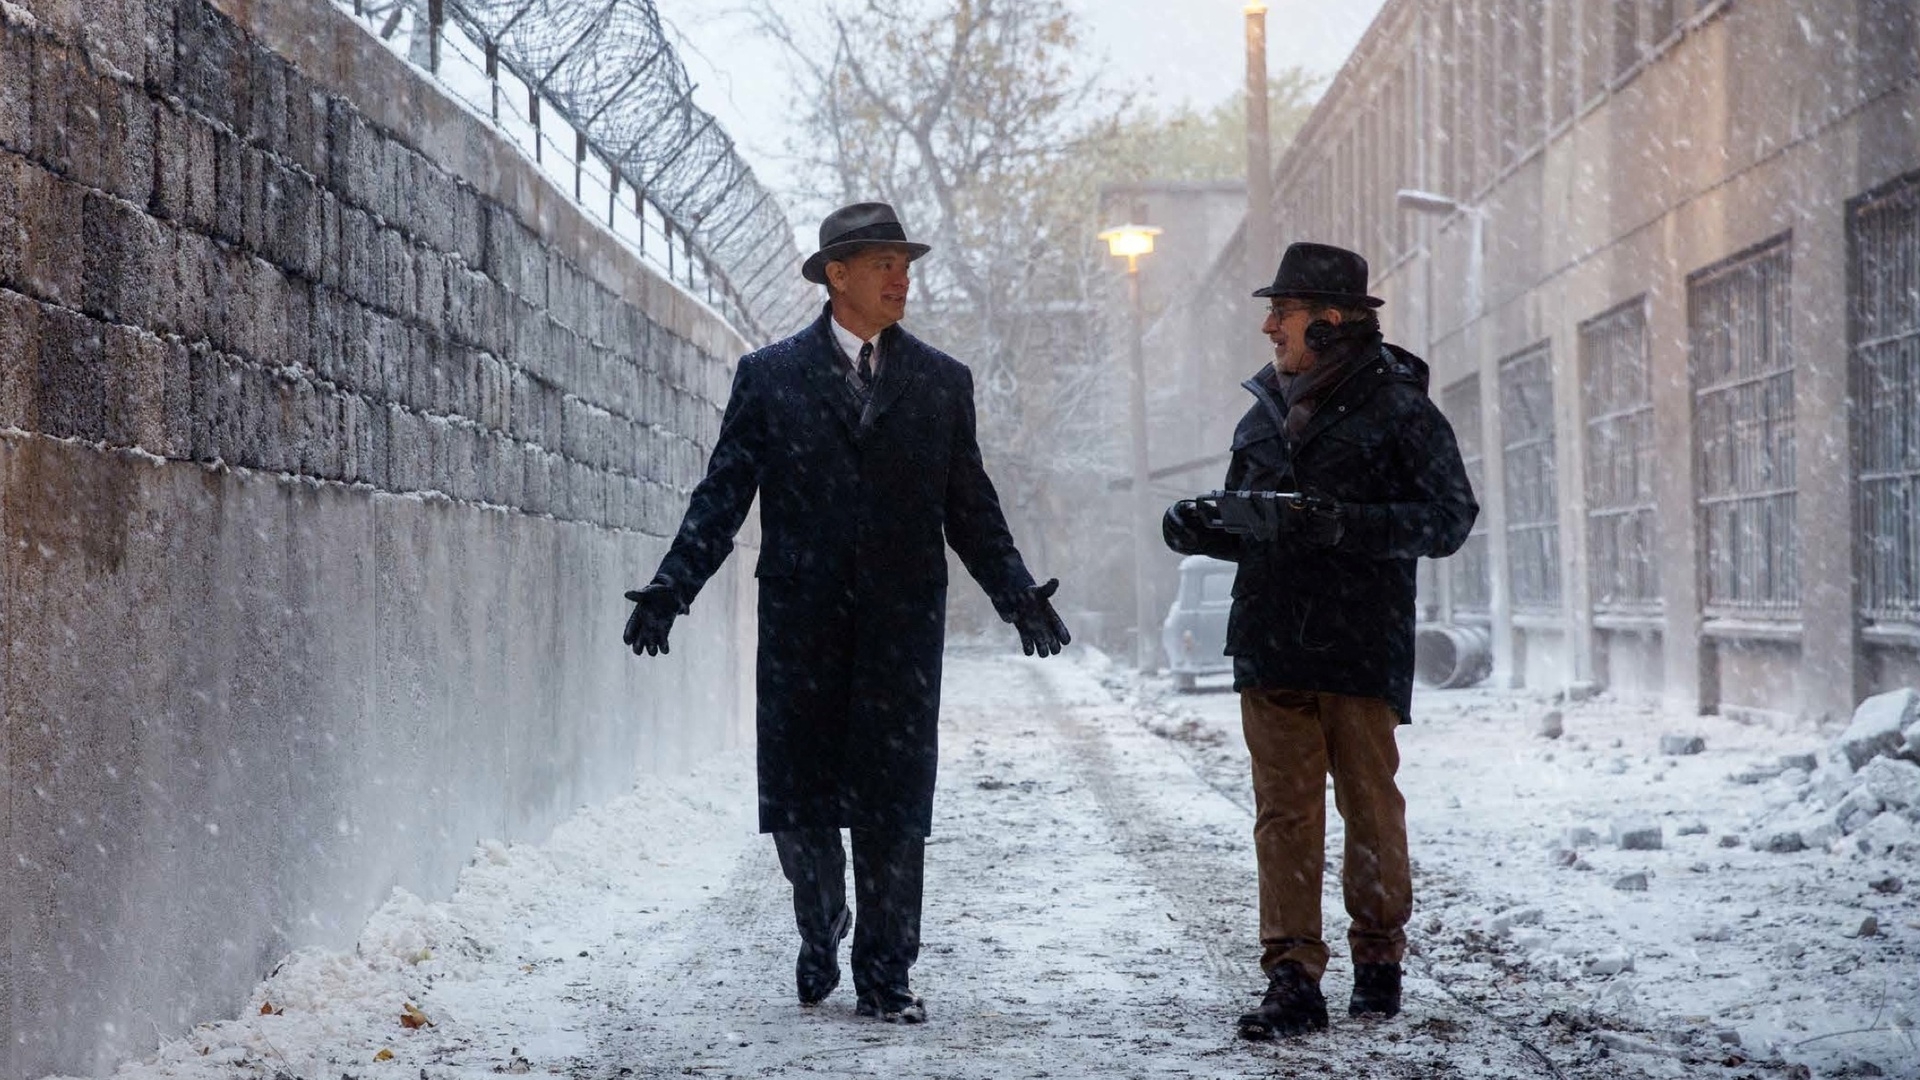 Bridge of Spies Tom and Steven for 1920 x 1080 HDTV 1080p resolution